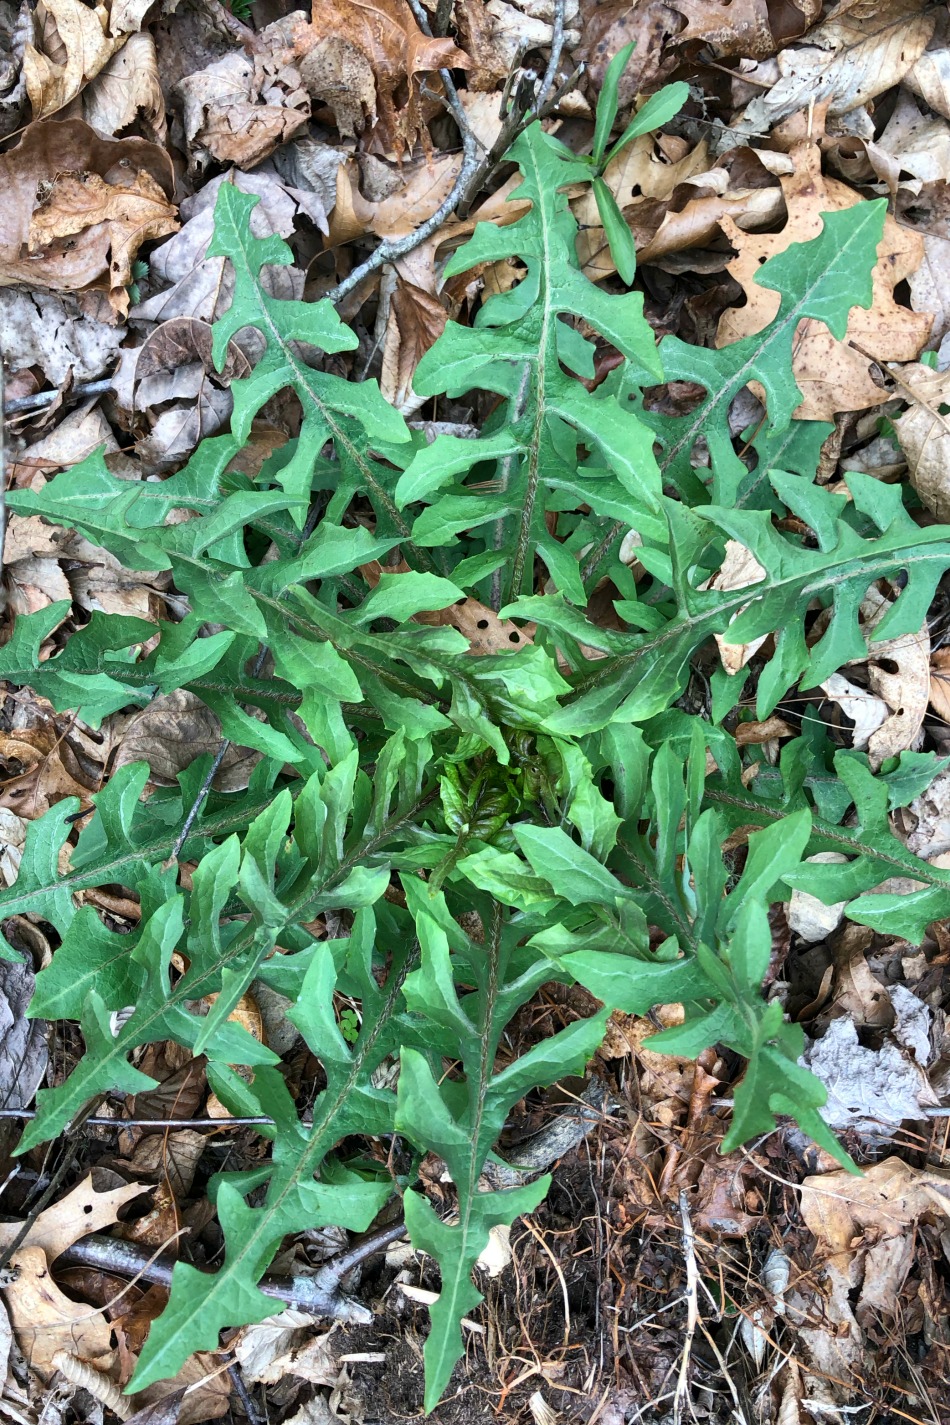 The Start Of A Budding Spring | Growing Up Herbal | Spring is here! I’m sharing some photos of plants blooming on the mountain and how living changes from season to season.